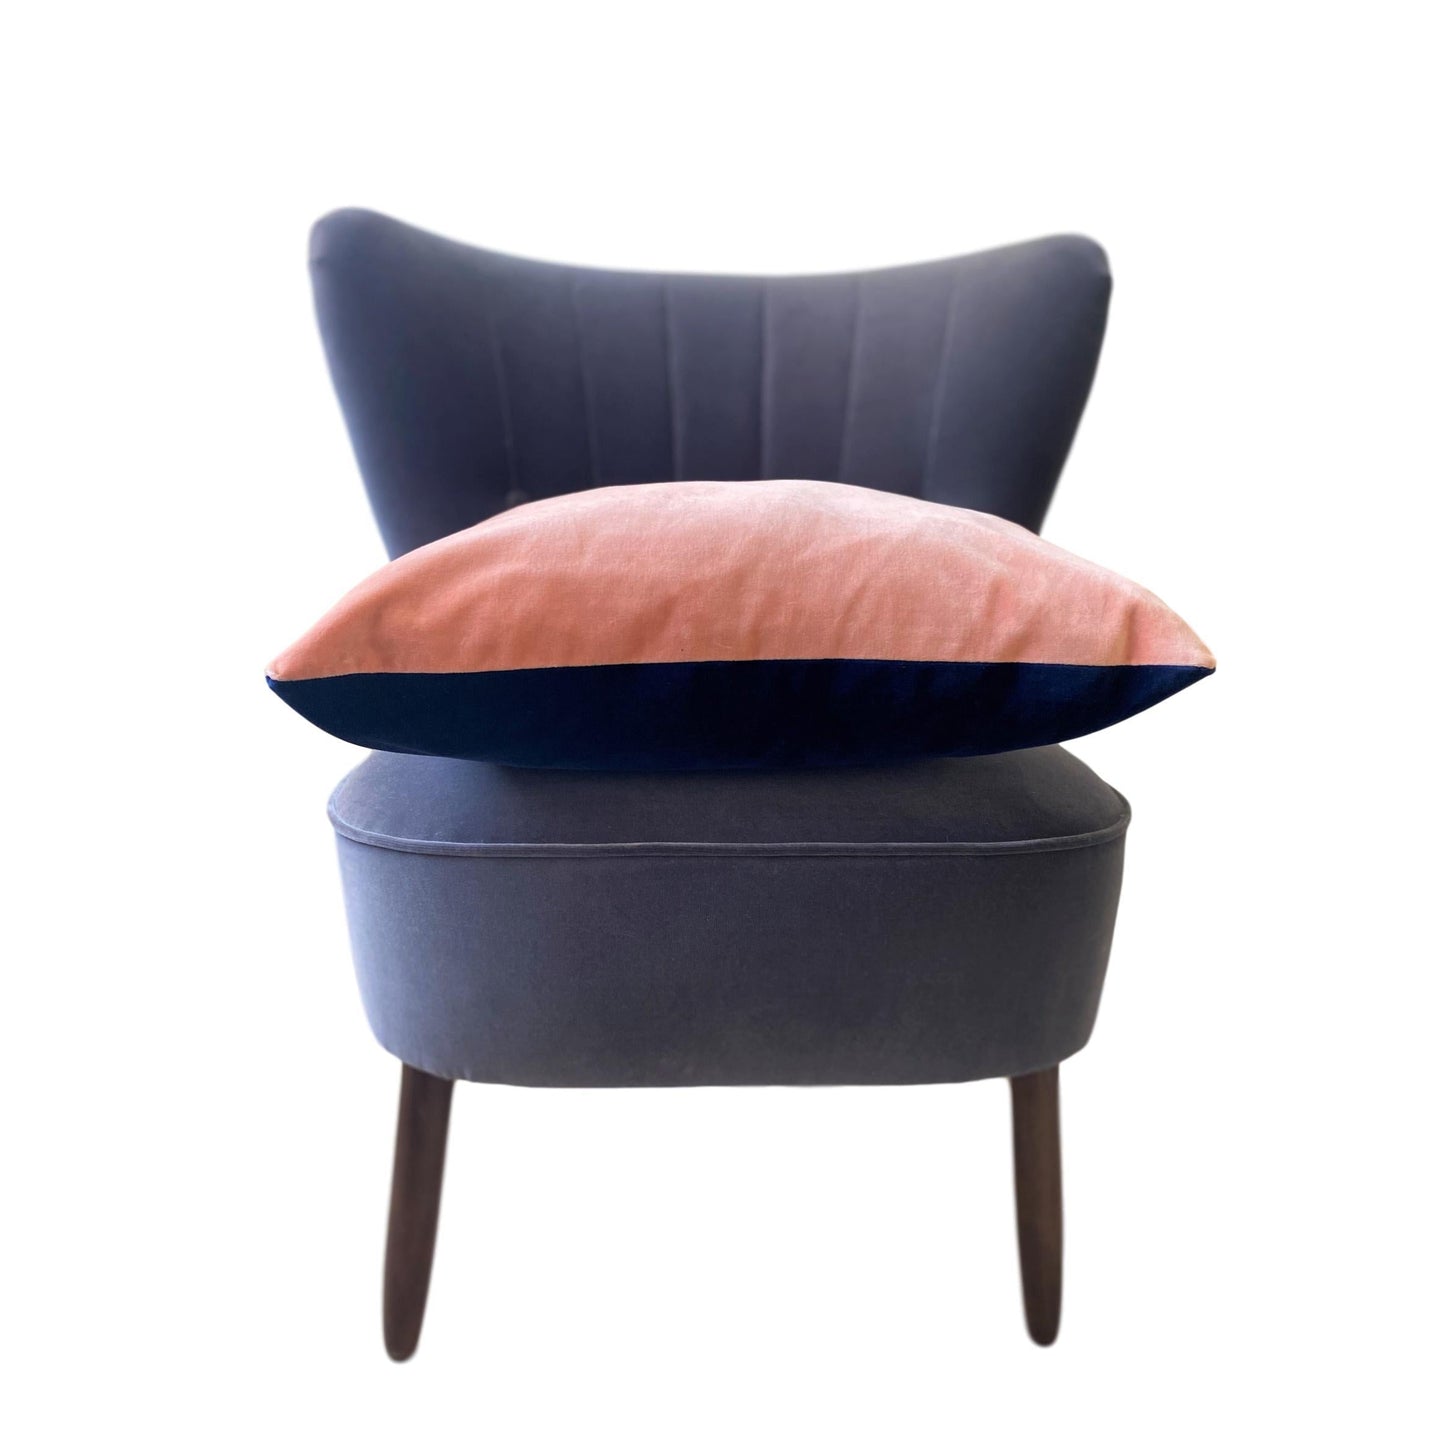 Blush pink velvet cushion with navy by luxe 39